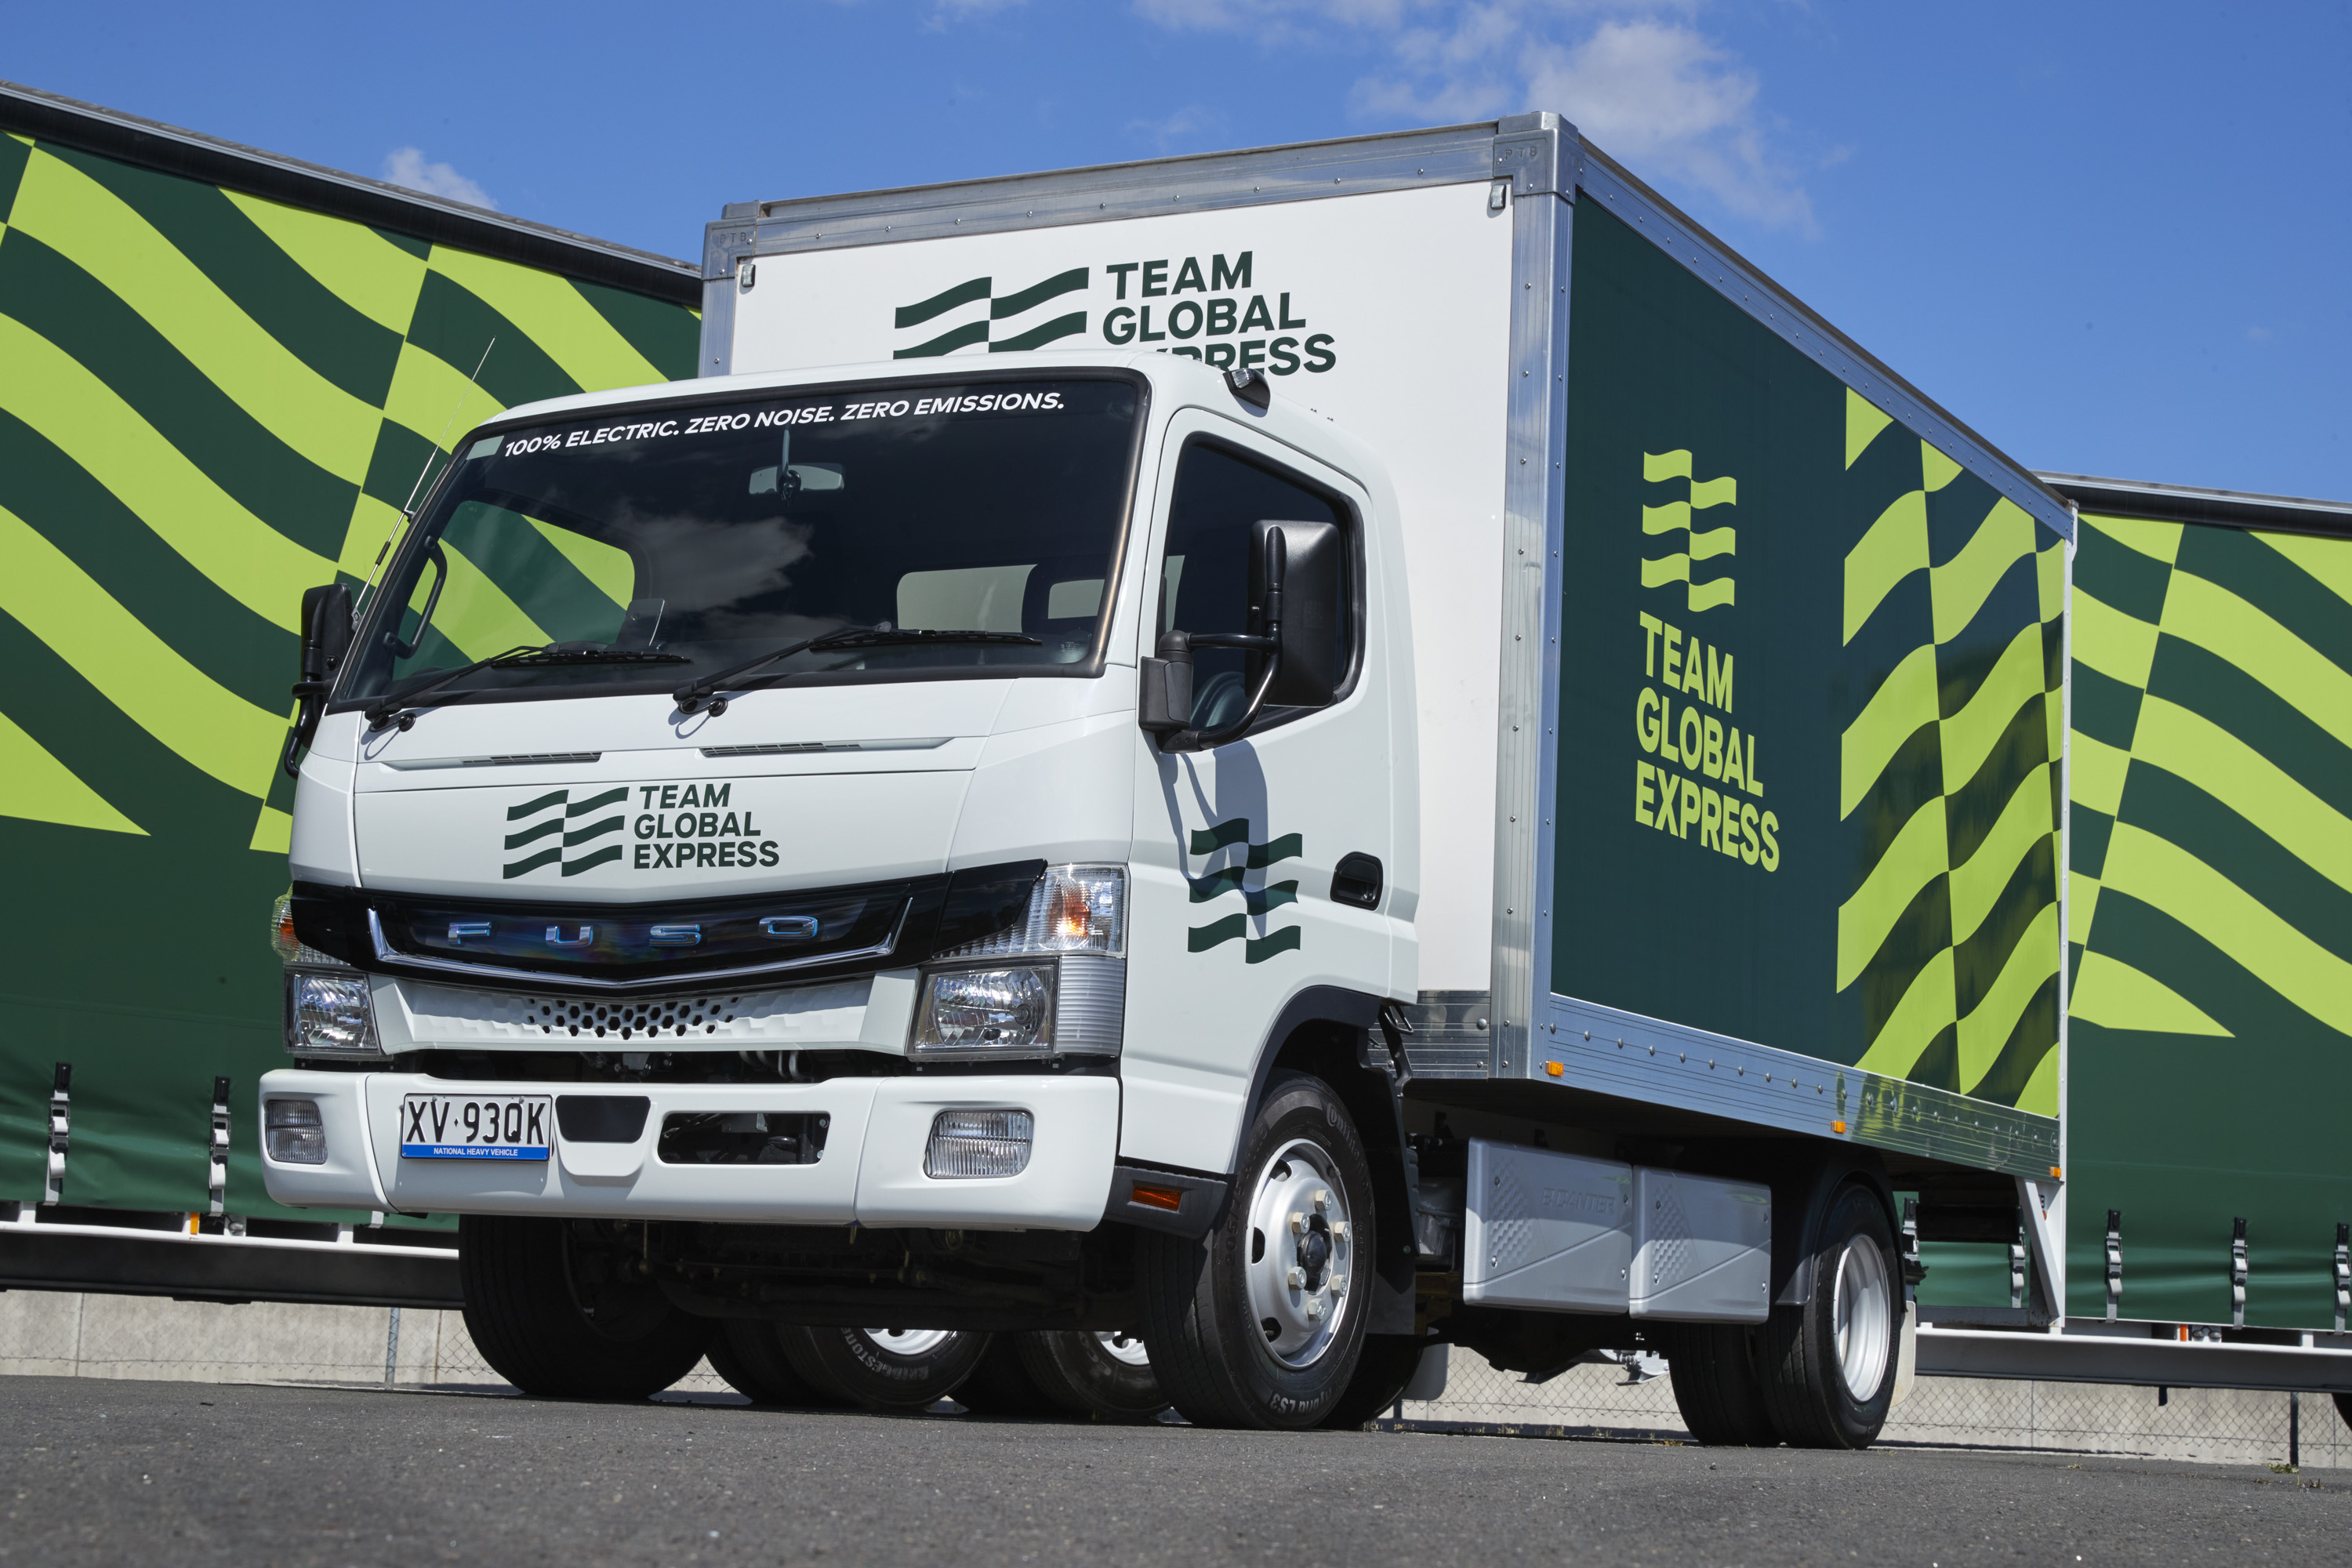 Team Global Express orders 24 zero-emission Fuso eCanters for electric delivery project